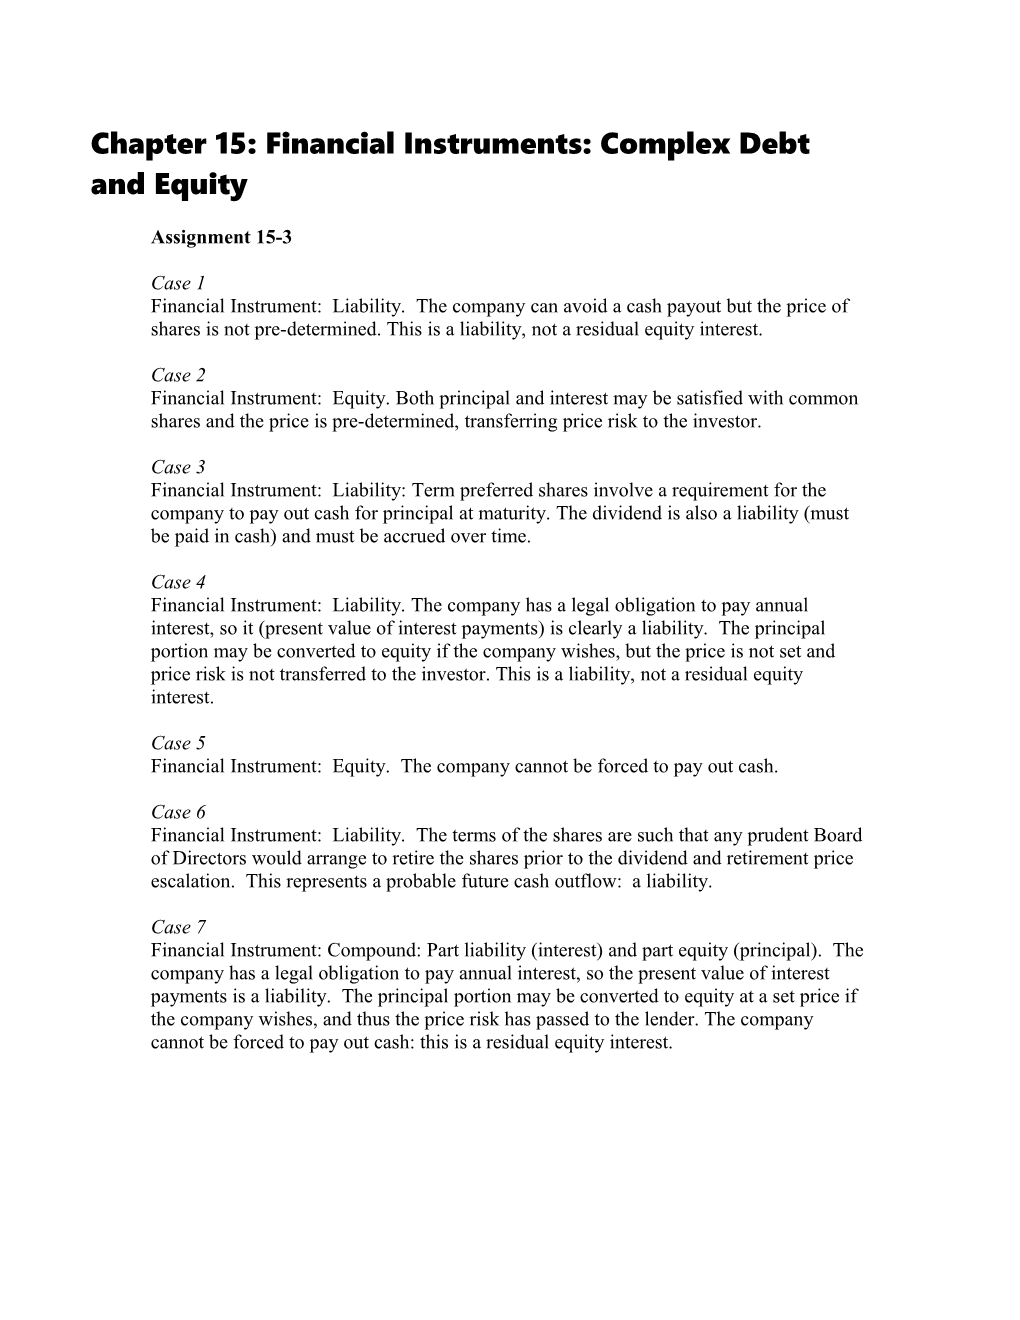 Chapter 14: Complex Debt and Equity Instruments